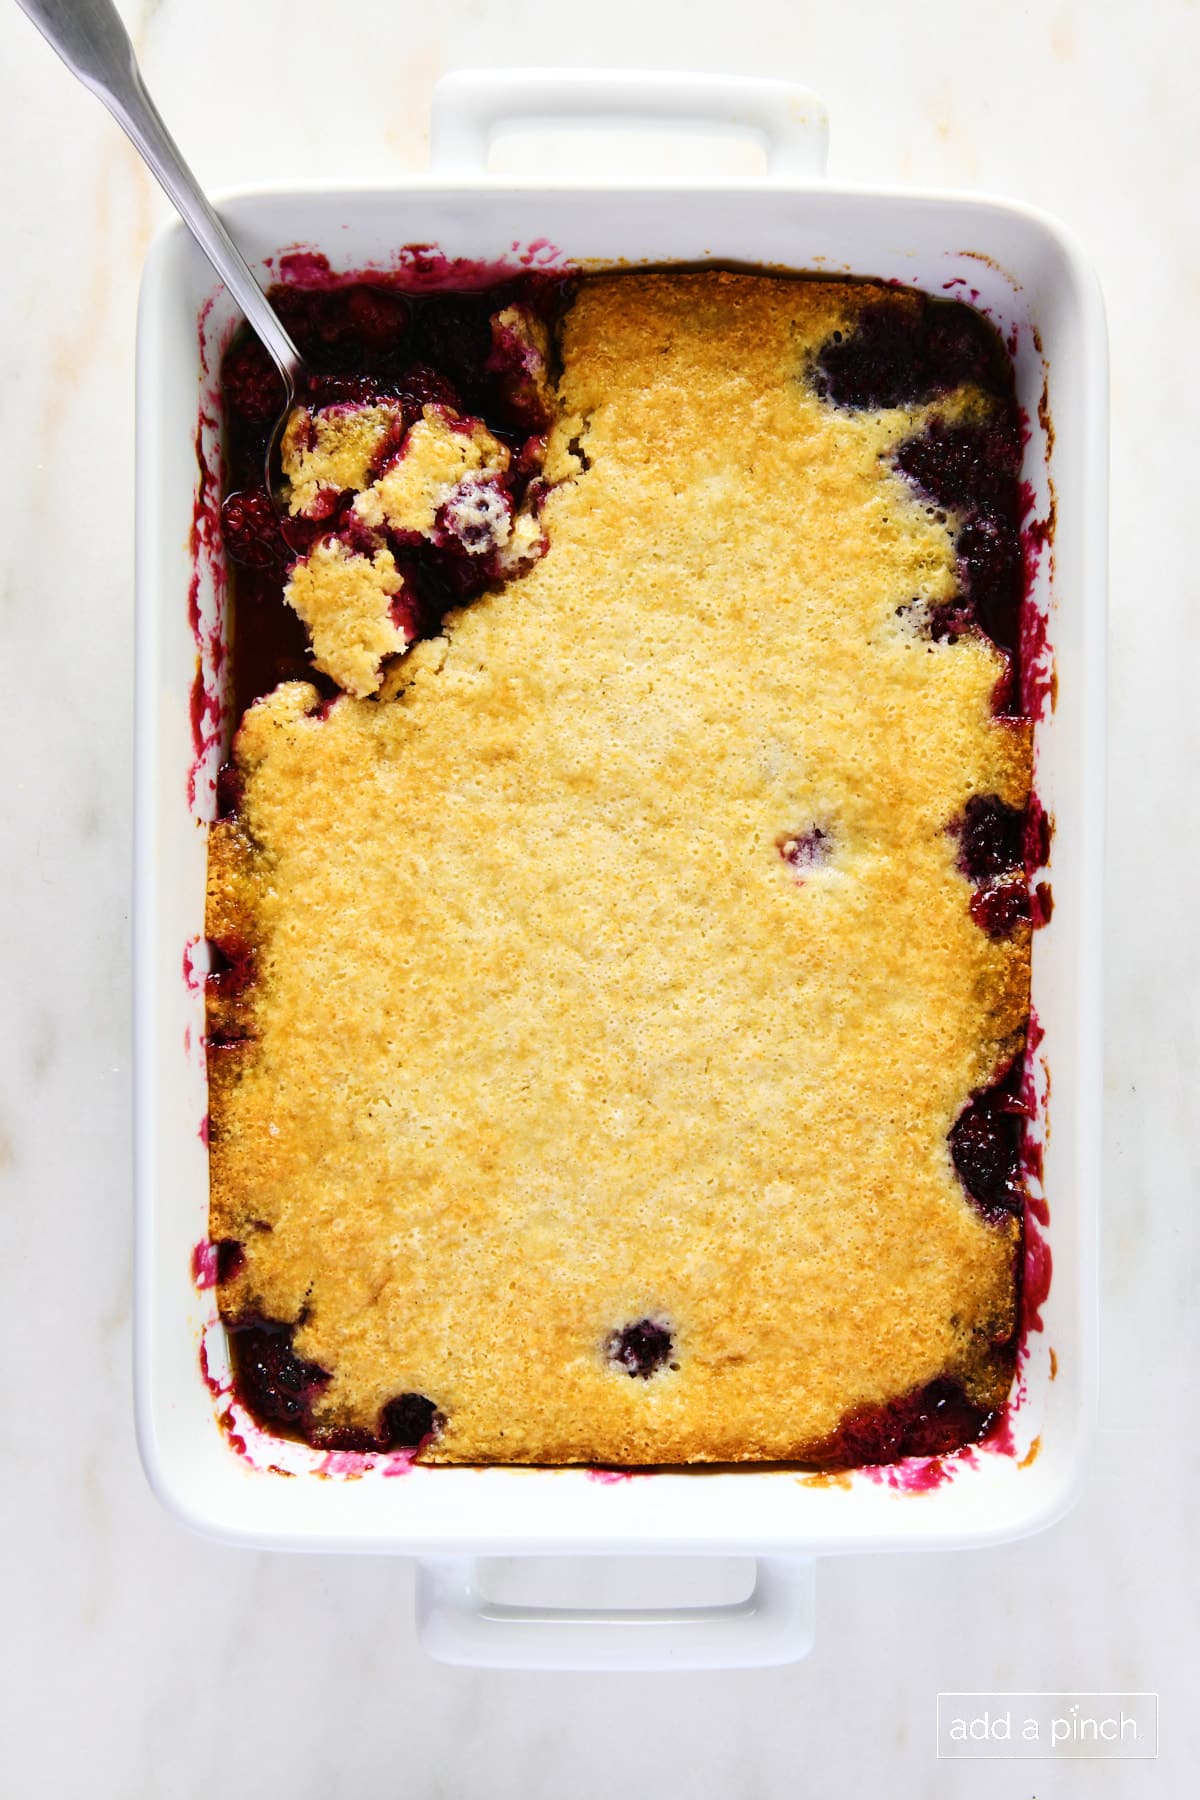 Blackberry cobbler in a white 9x13 baking dish ready to be served.